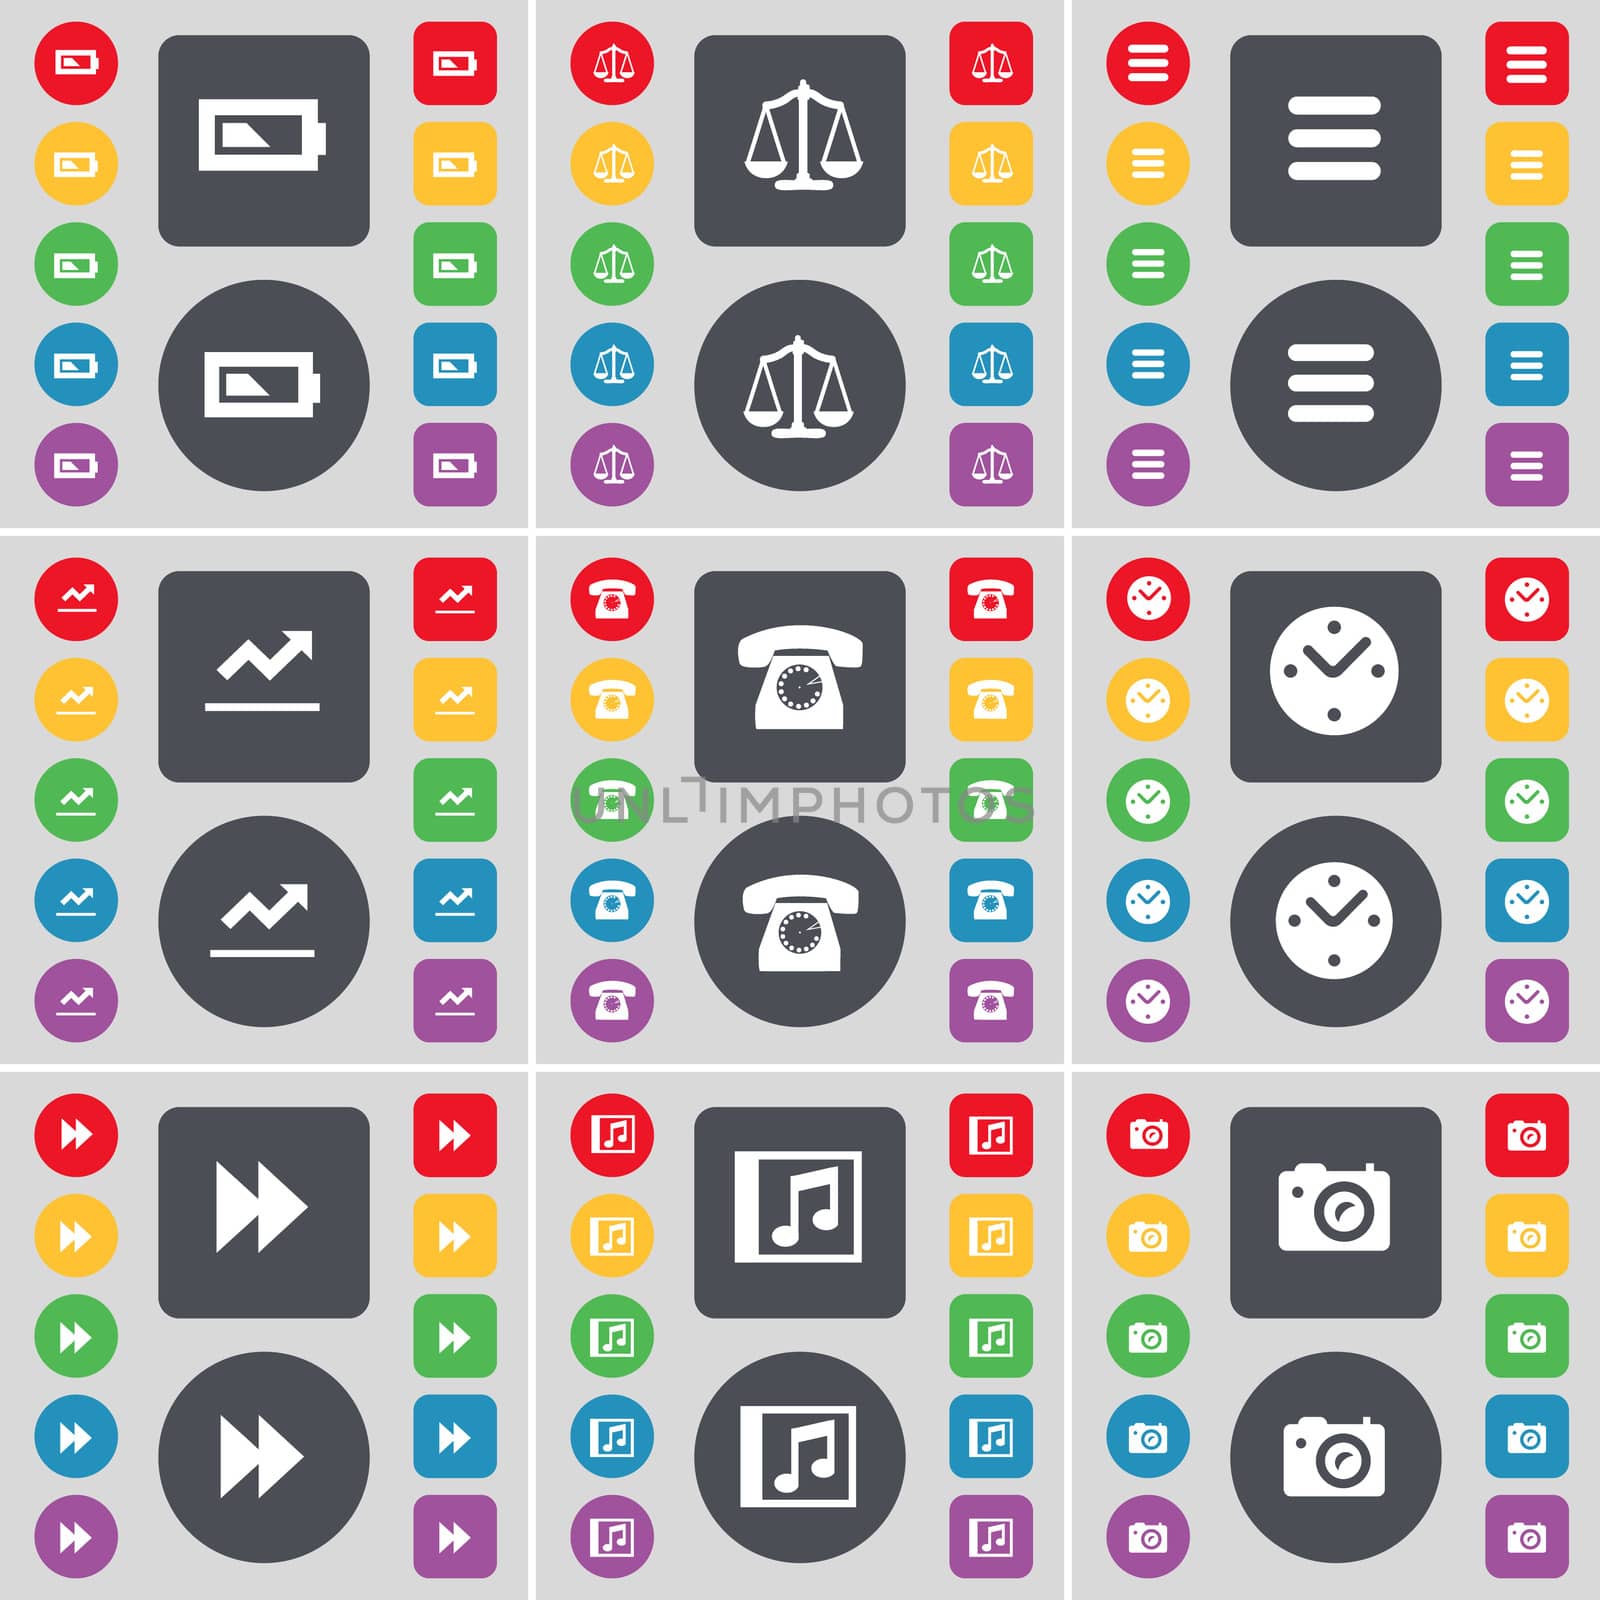 Battery, Scales, Apps, Graph, Retro phone, Clock, Rewind, Music window, Camera icon symbol. A large set of flat, colored buttons for your design. illustration